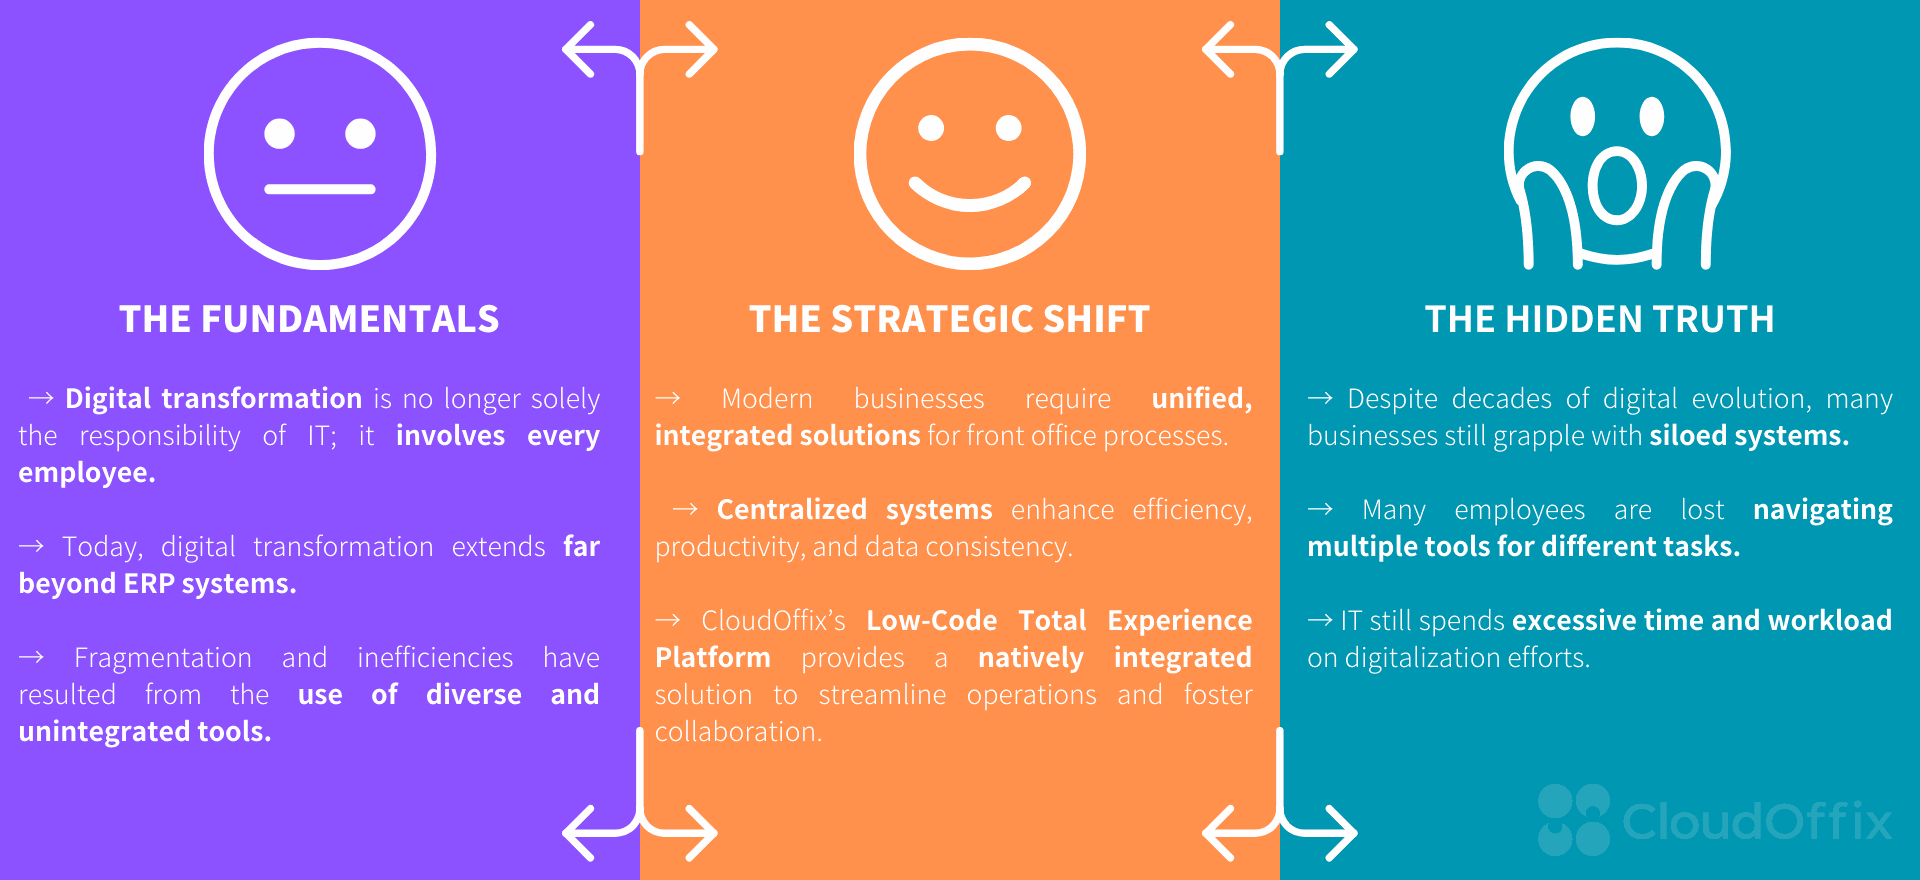 An infographic with three sections, each representing a different aspect of digital transformation for businesses. The left section, titled &quot;The Fundamentals,&quot; has a neutral face icon and highlights the broad involvement of employees in digital transformation, the extension beyond ERP systems, and the inefficiencies of using diverse, unintegrated tools. The middle section, titled &quot;The Strategic Shift,&quot; has a happy face icon and emphasizes the need for unified, integrated solutions, the benefits of centralized systems, and CloudOffix's low-code total experience platform. The right section, titled &quot;The Hidden Truth,&quot; has a shocked face icon and discusses the persistence of siloed systems, the confusion among employees navigating multiple tools, and the excessive time IT spends on digitalization.